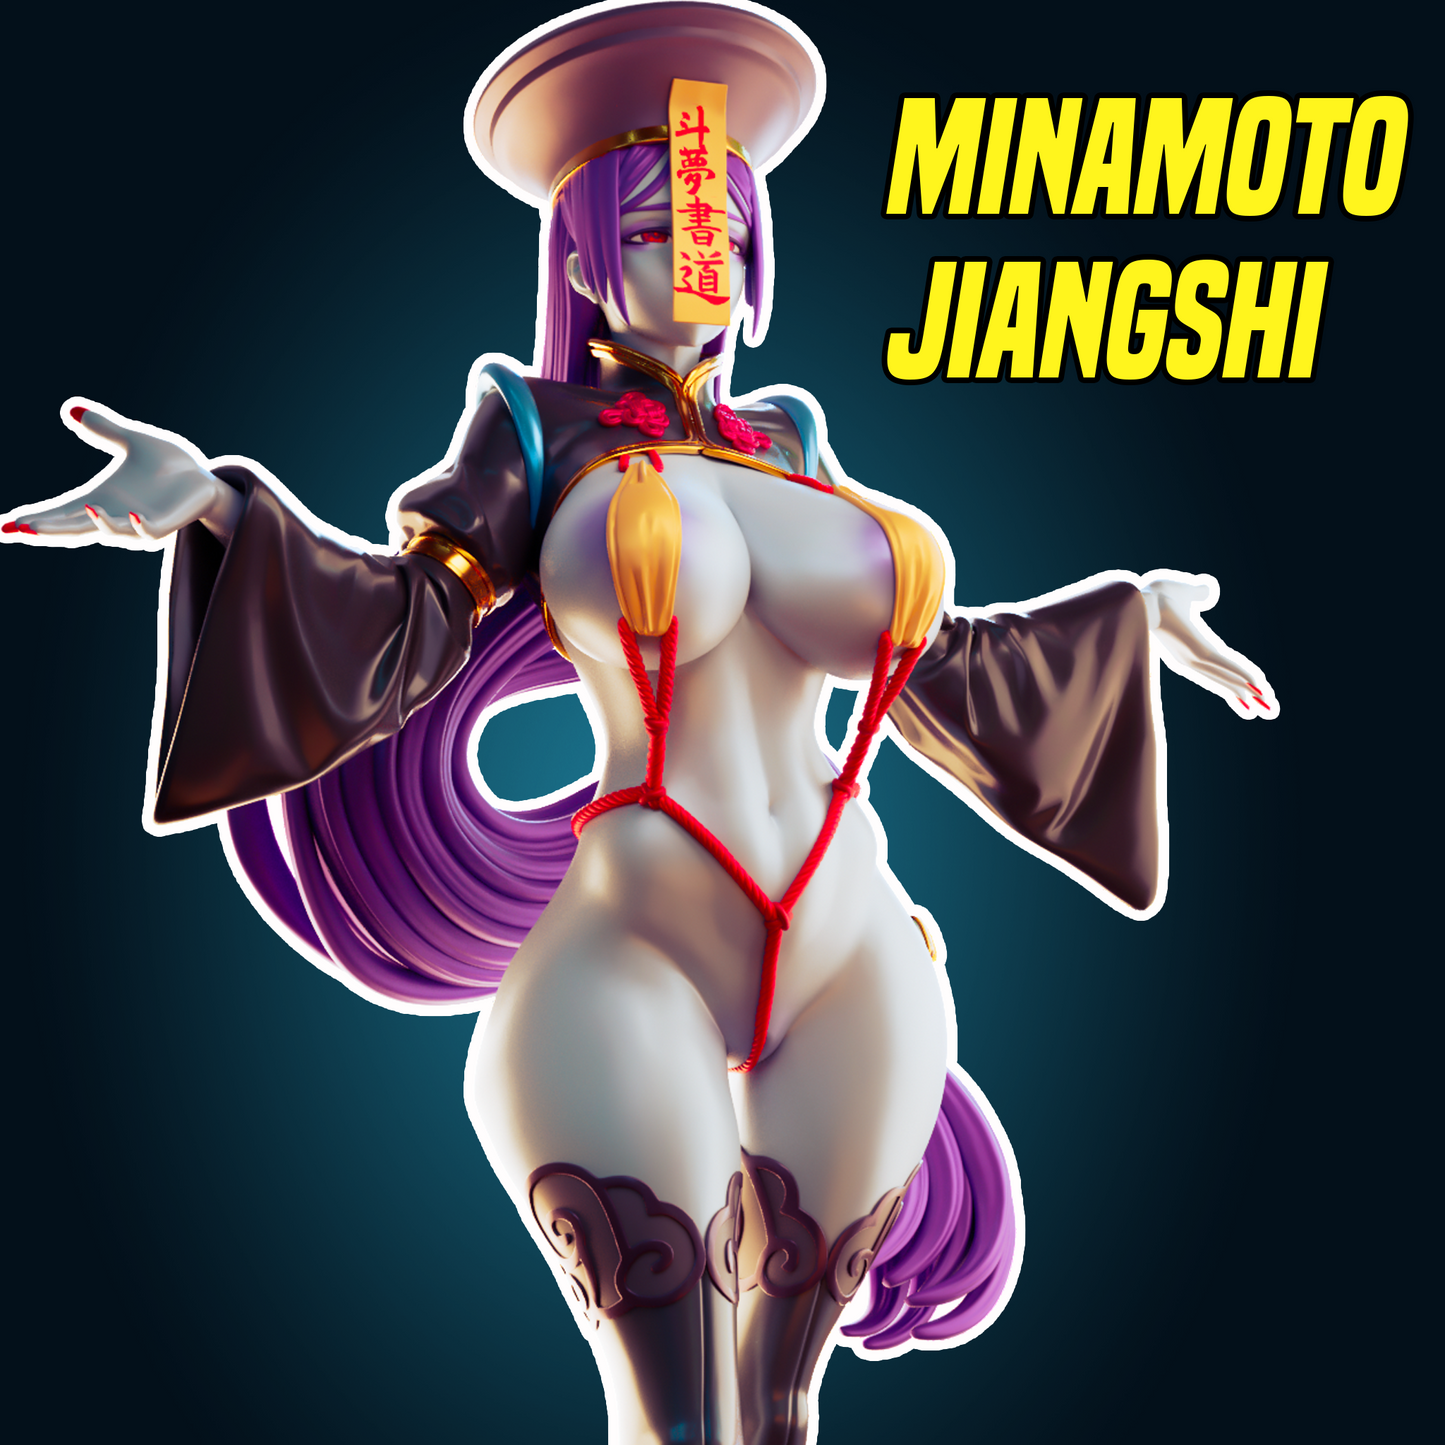 Minamoto Jiangshi from Officer Rhu Fan creation (ADULT) Model Kit for painting and collecting.